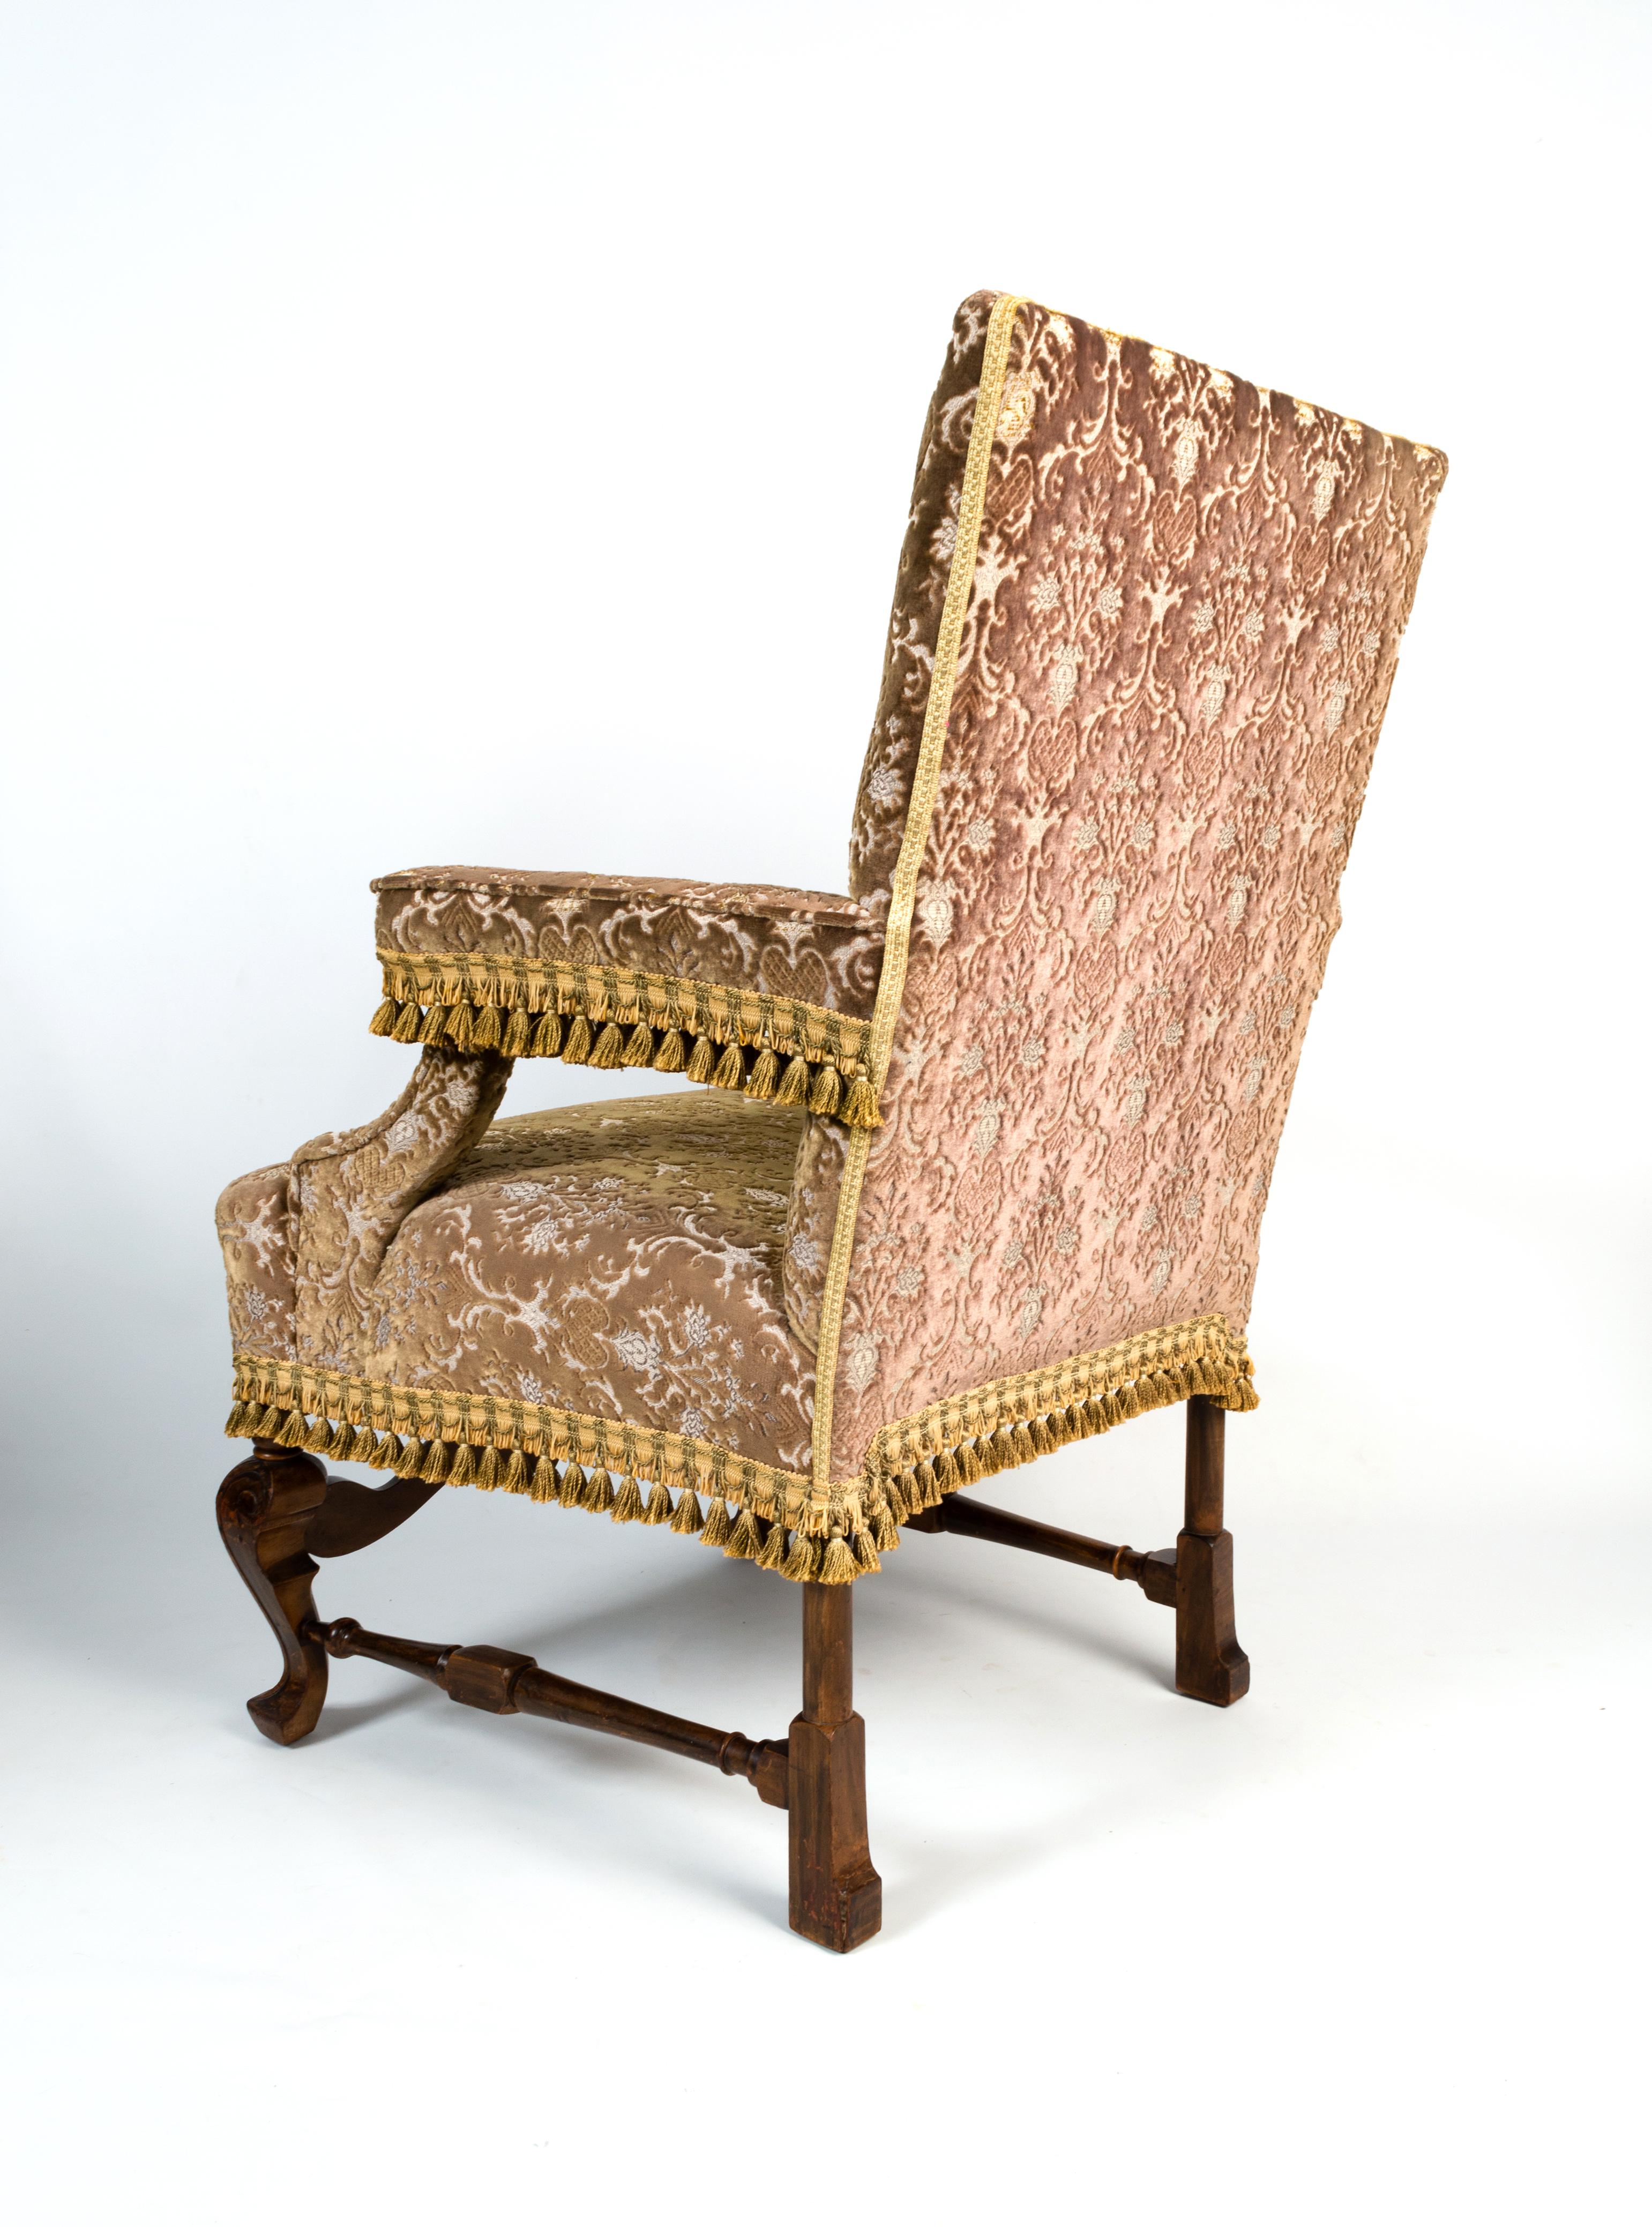 Antique English William and Mary Revival Elbow Chair Armchair 3